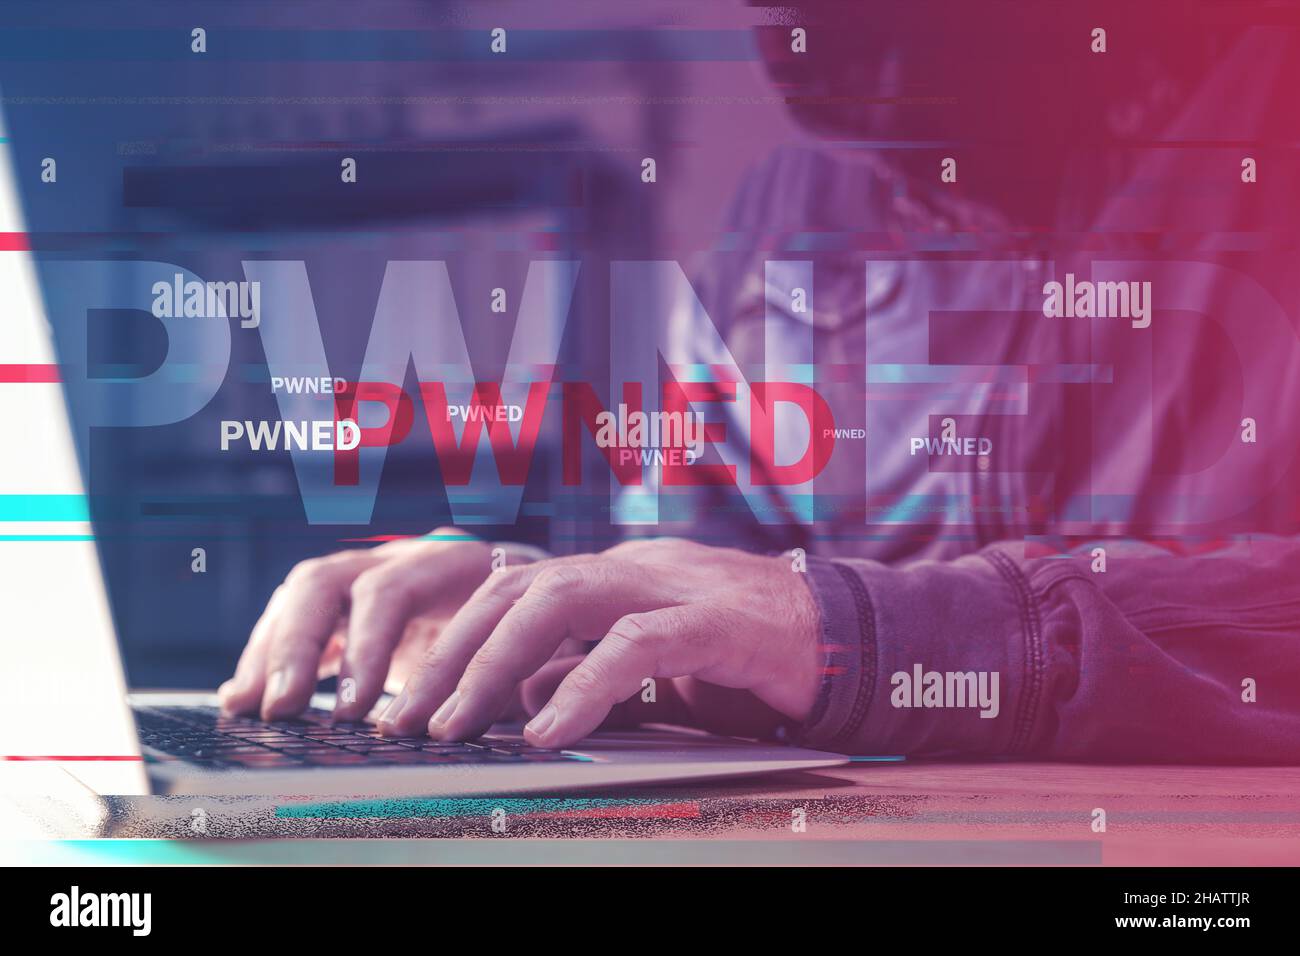 Pwned computer, hacker using laptop to get power over devices connected to a network, digitally enhanced image with selective focus Stock Photo